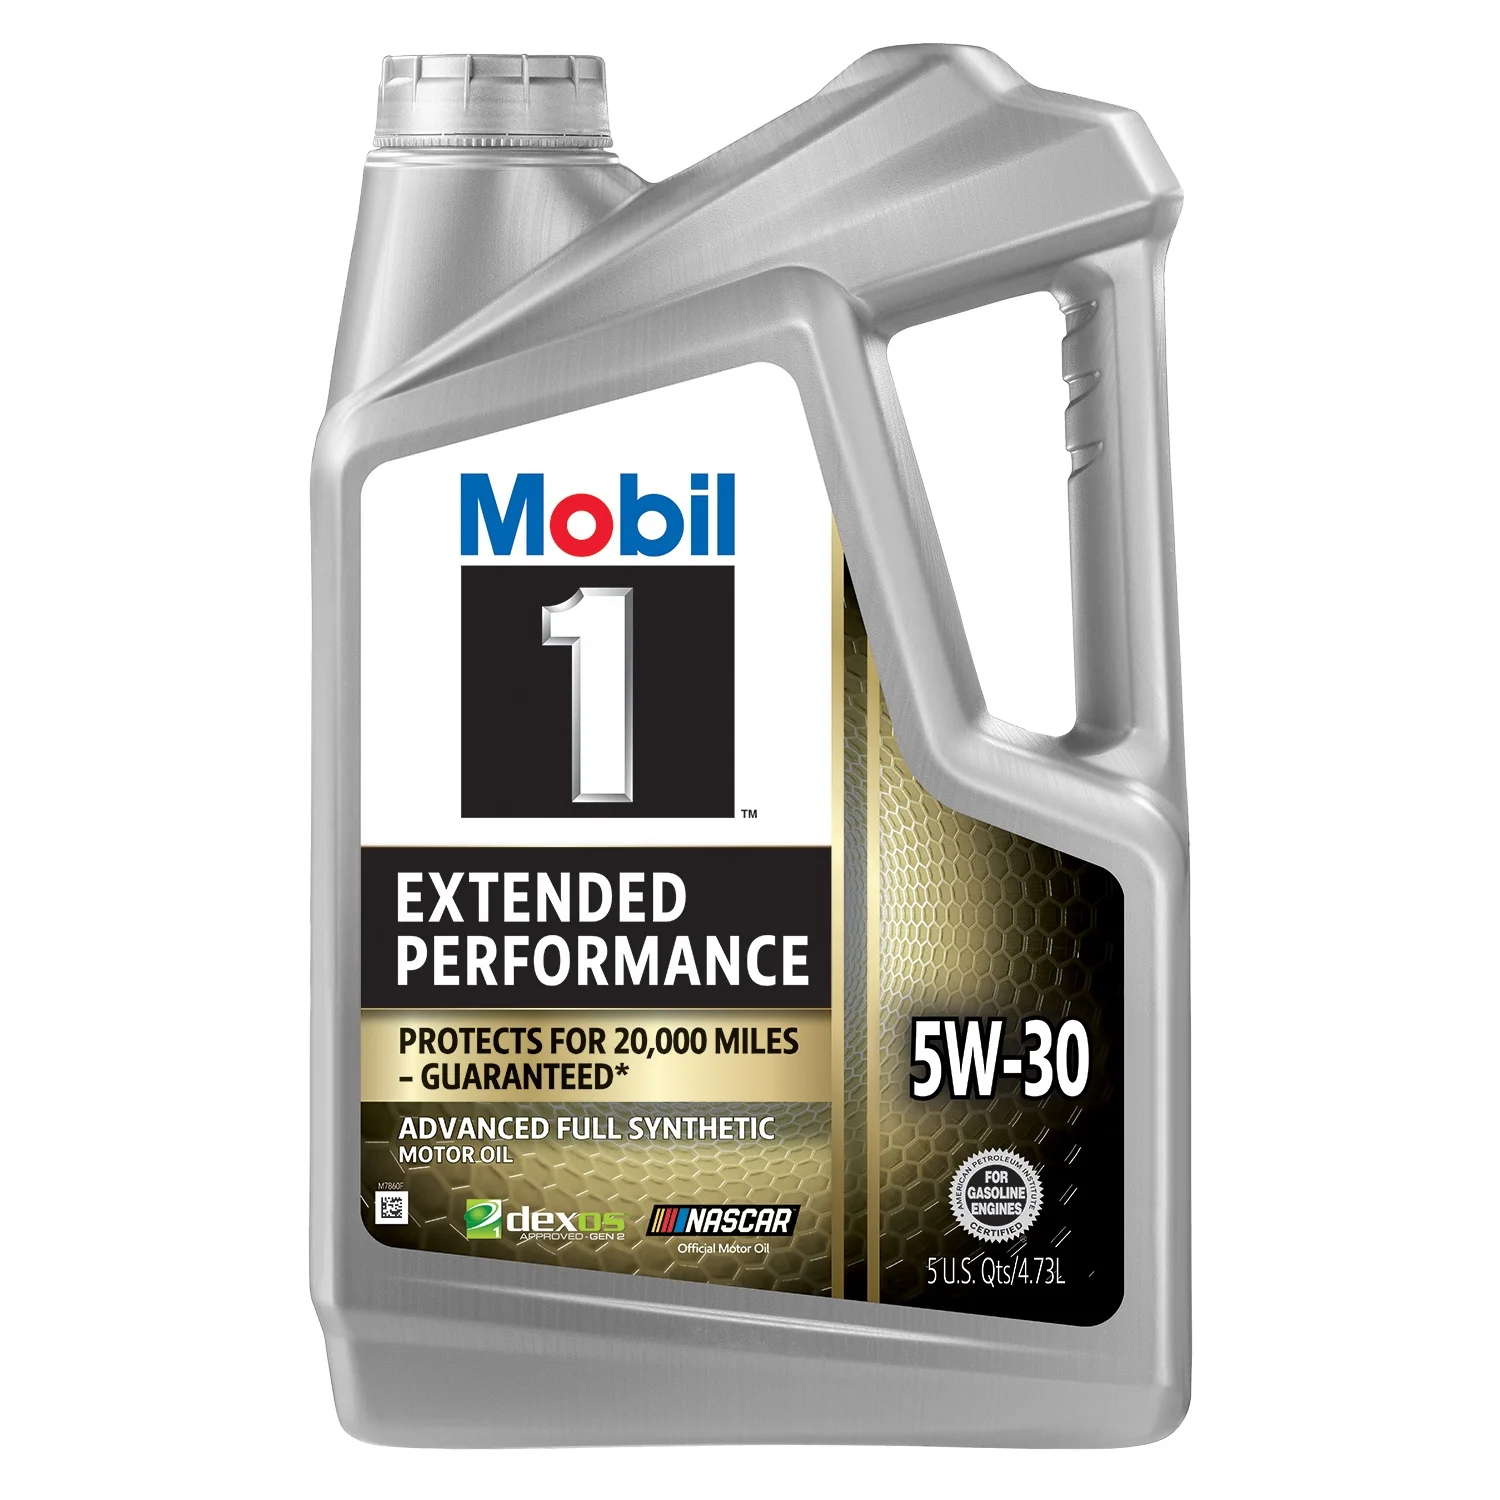 Mobil 1 5W30 Extended Performance Synthetic Motor Oil - 5 Quart (Pack of 3)